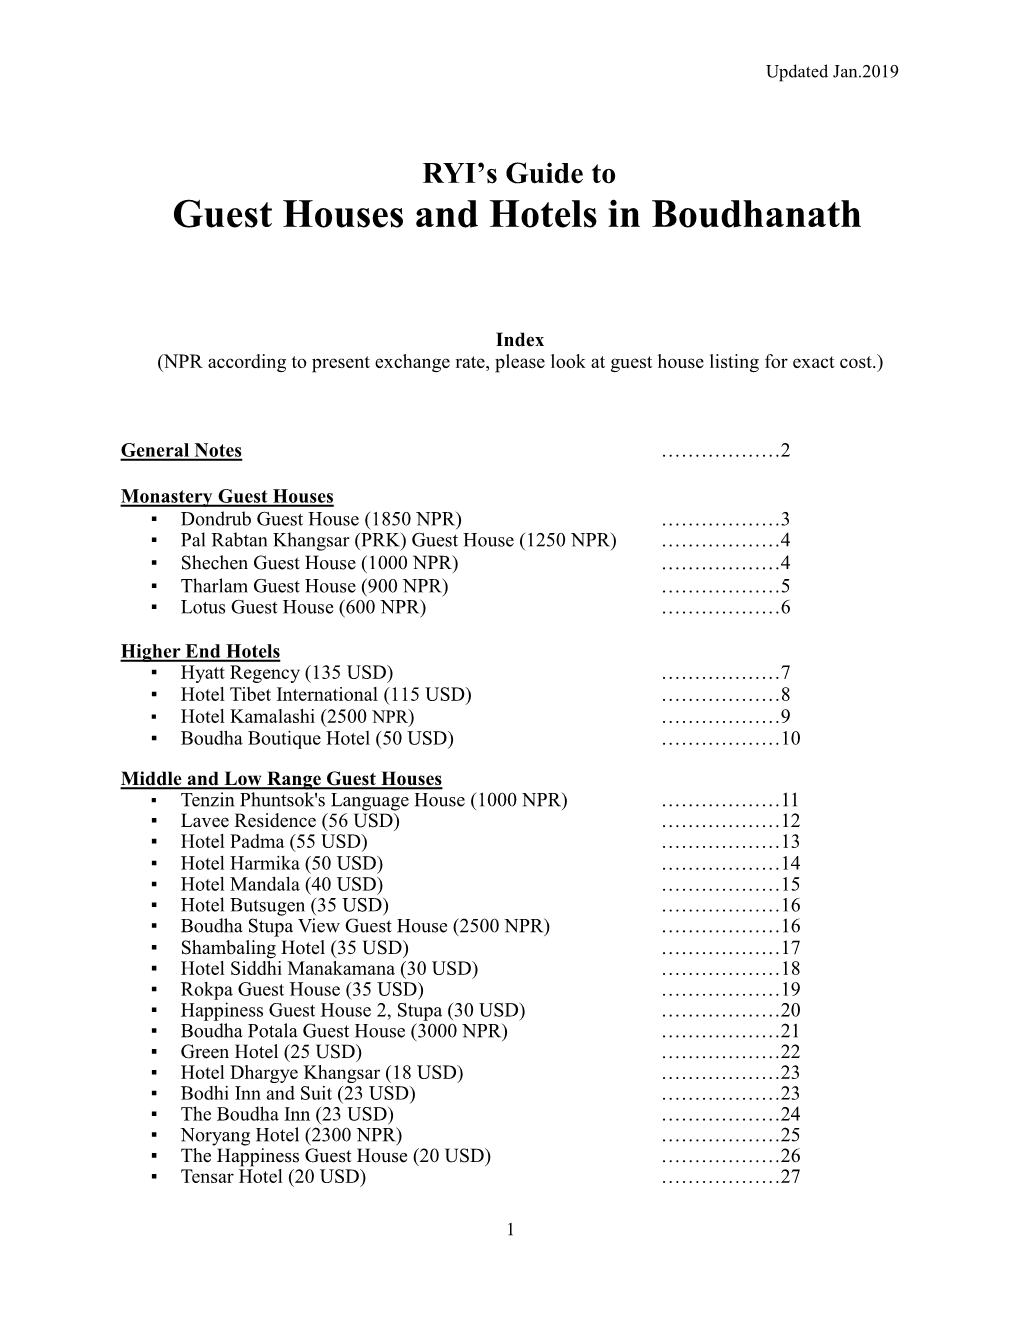 Guest Houses and Hotels in Boudhanath